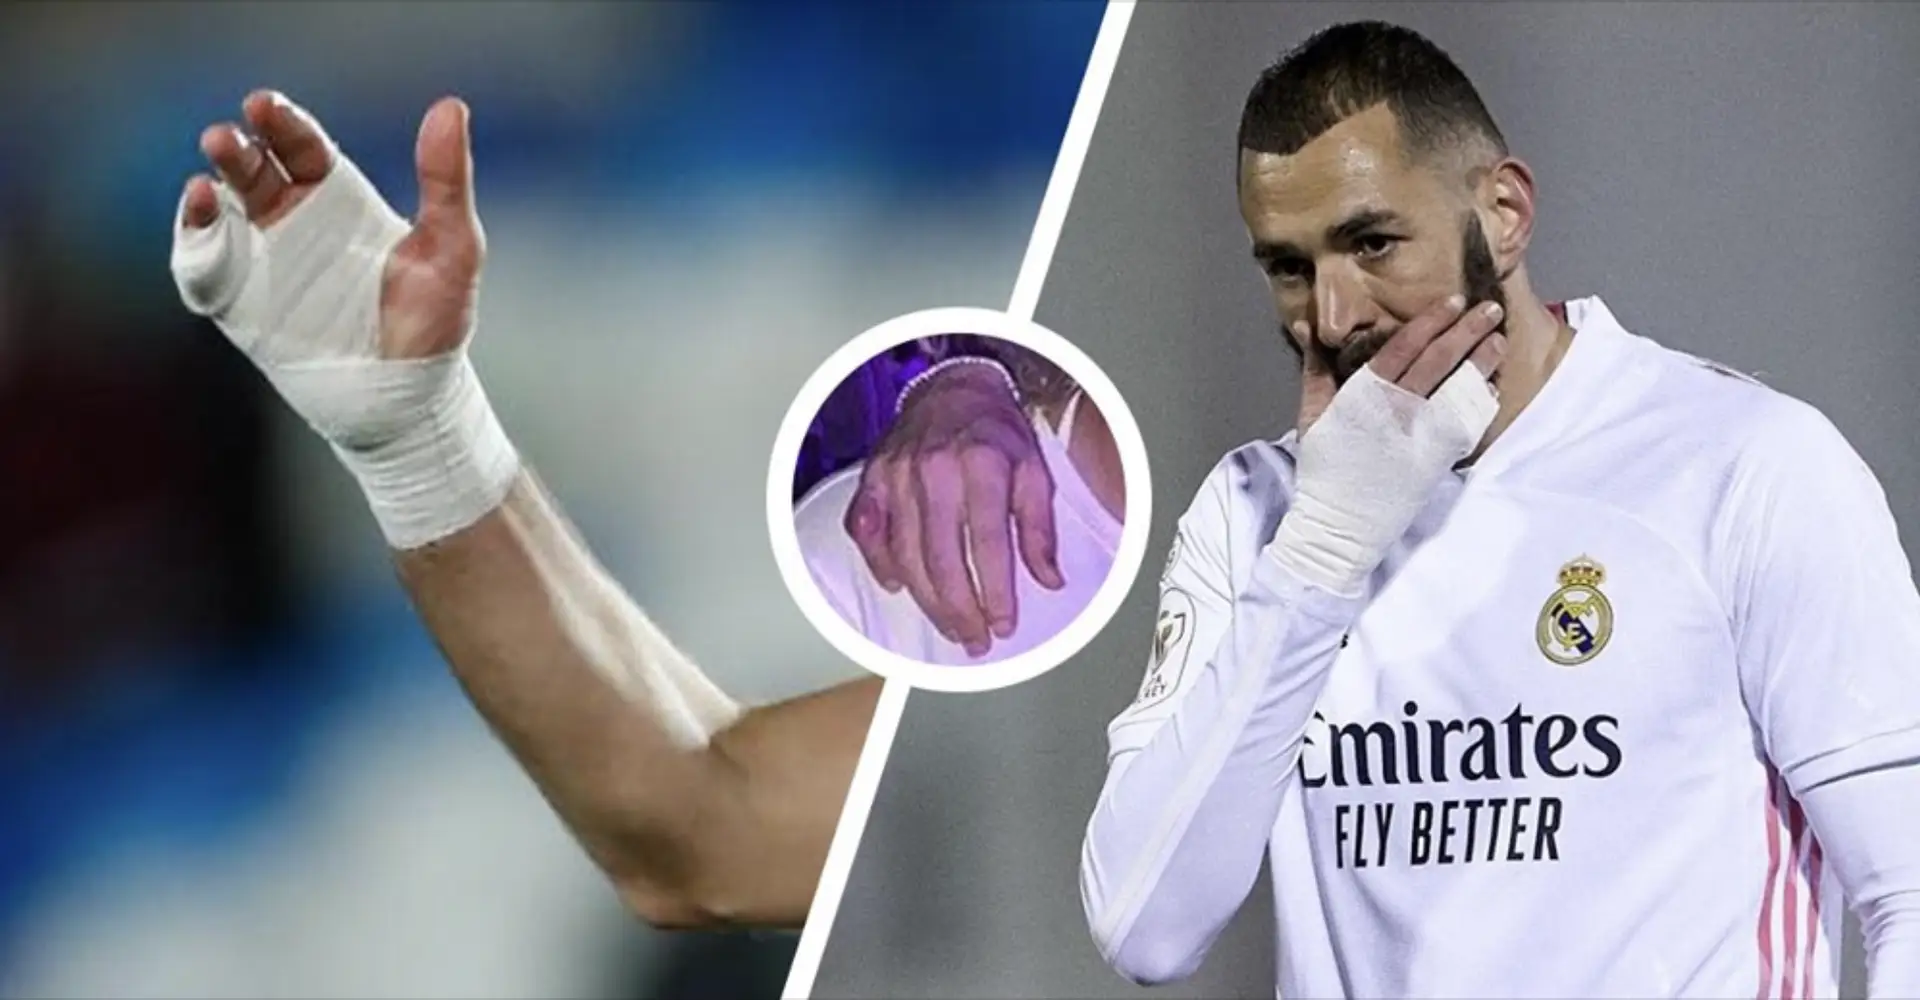 'How long has it been going on?' The big story behind Karim Benzema's little finger